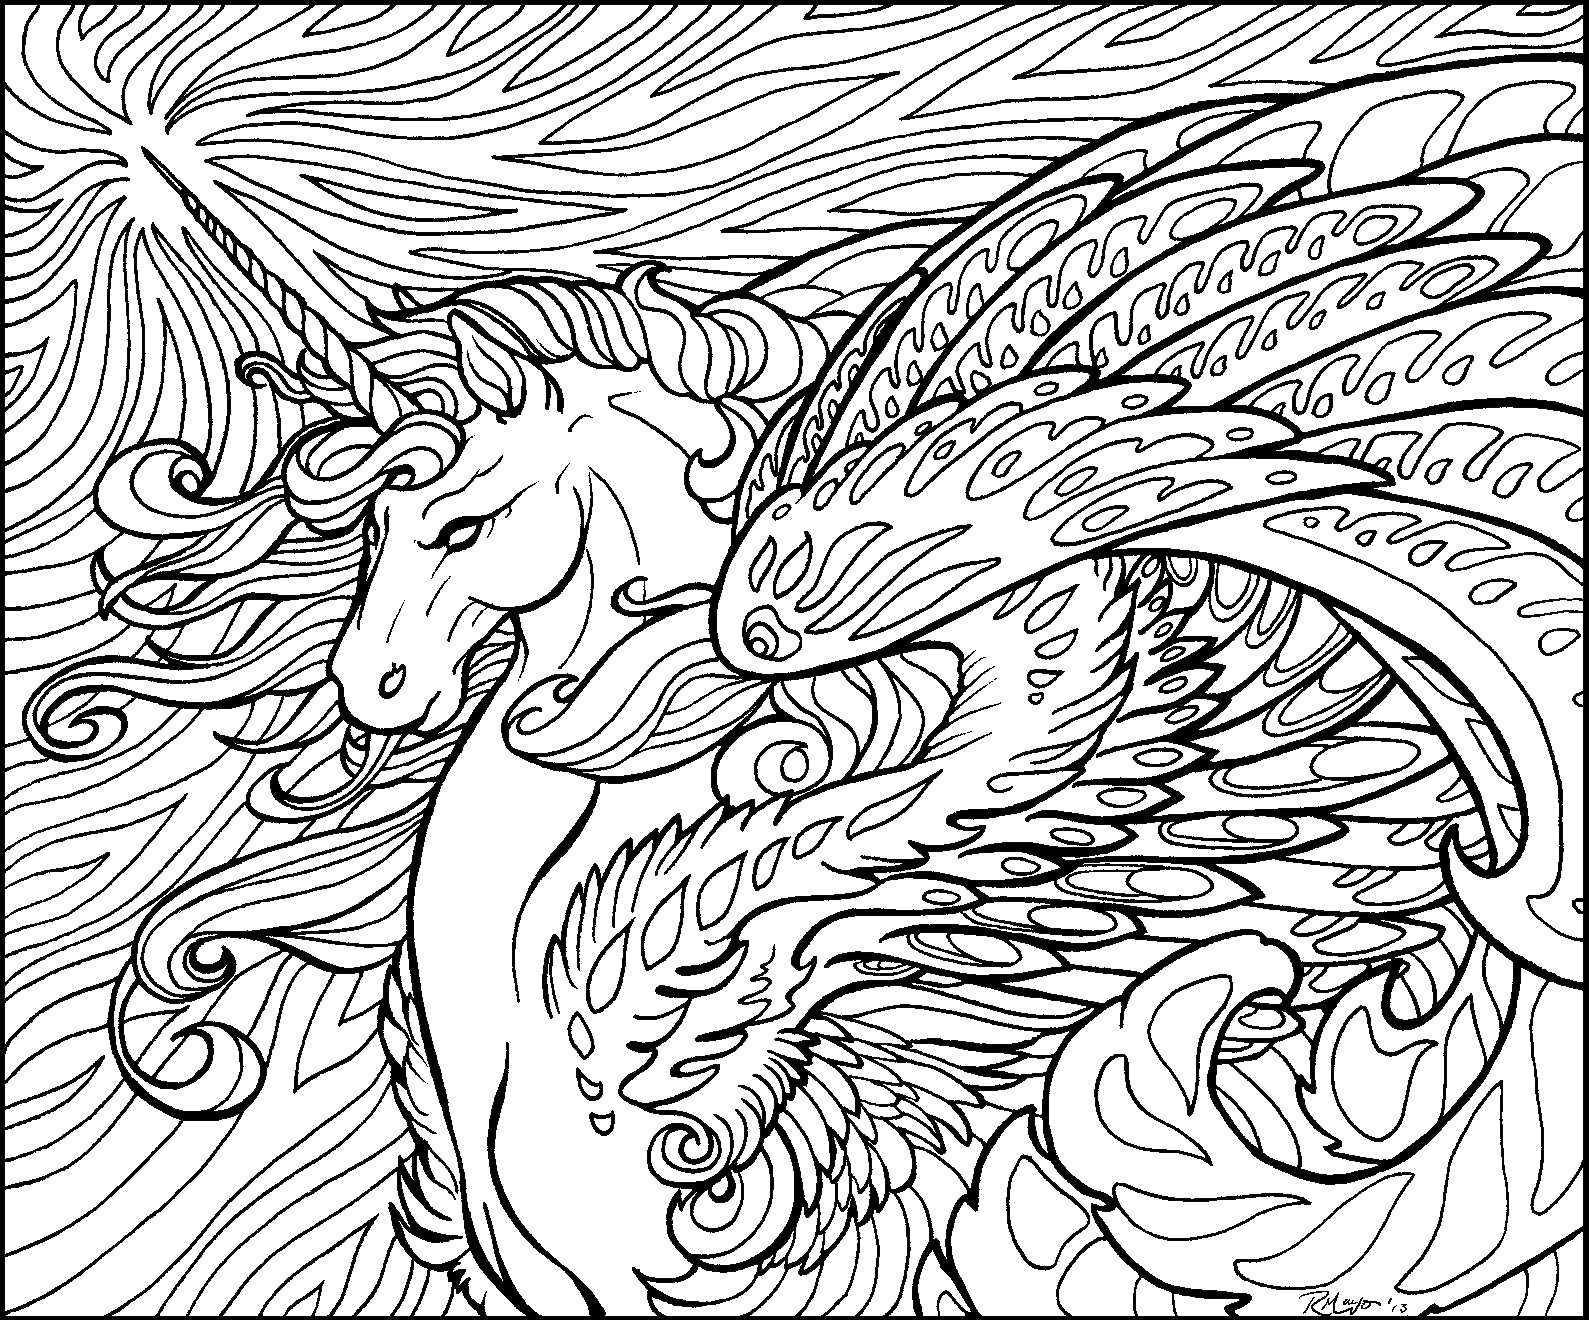 Unicorn Coloring Pages for Adults   Best Coloring Pages For Kids